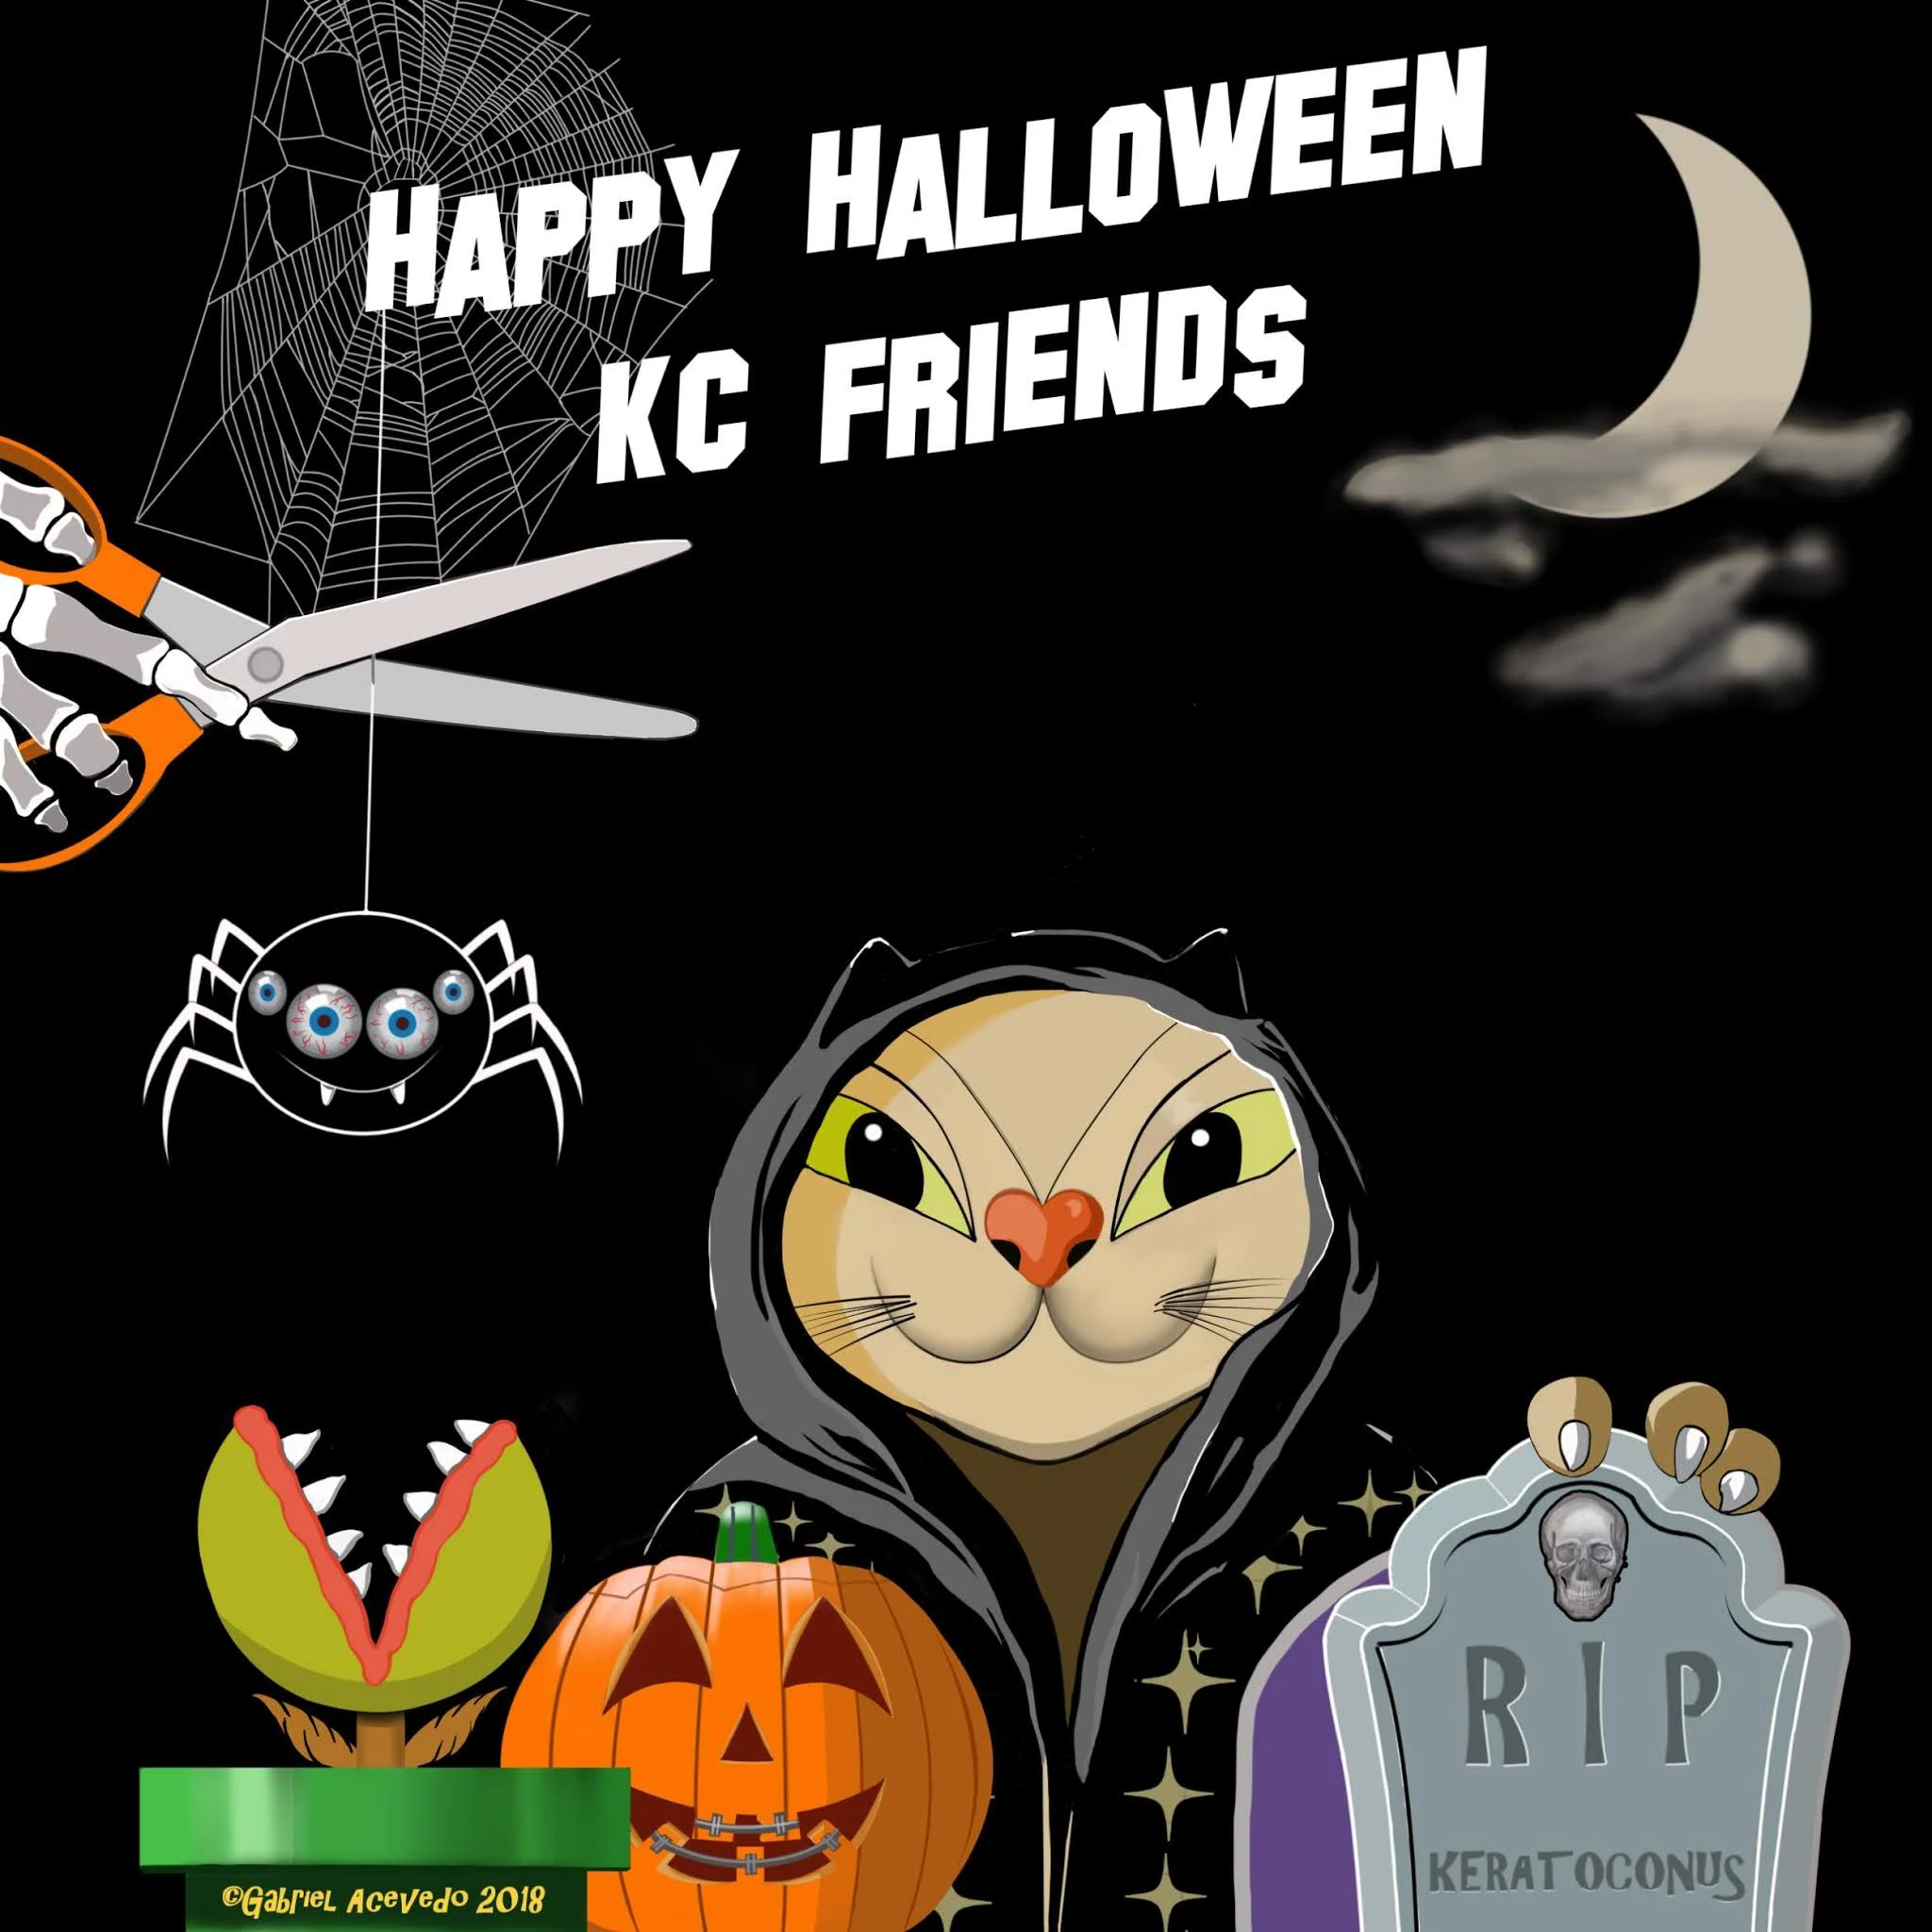 Keratocat wishes you a happy and safe Halloween